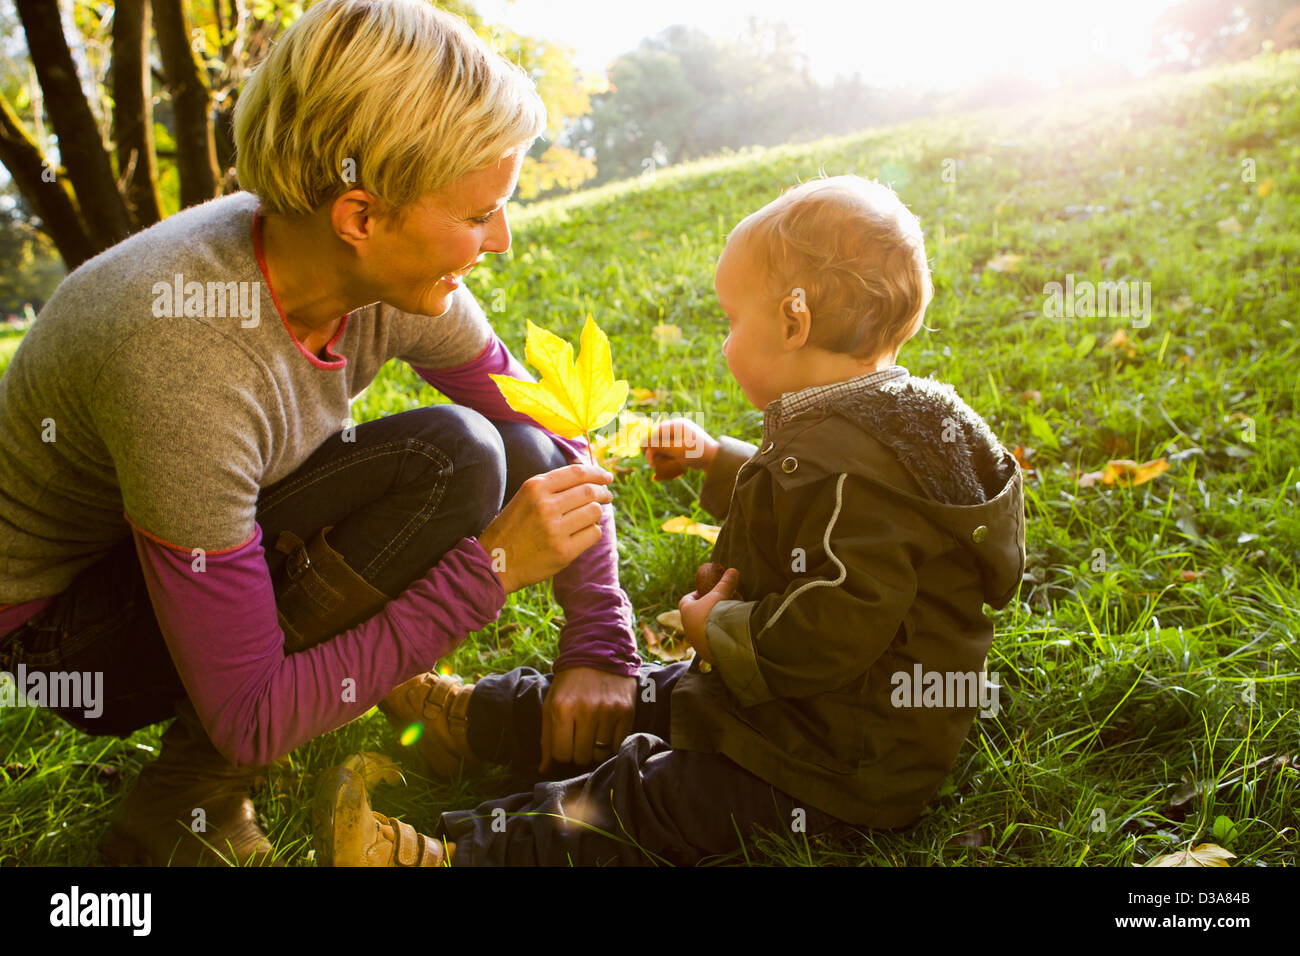 Mother and son playing in park Stock Photo